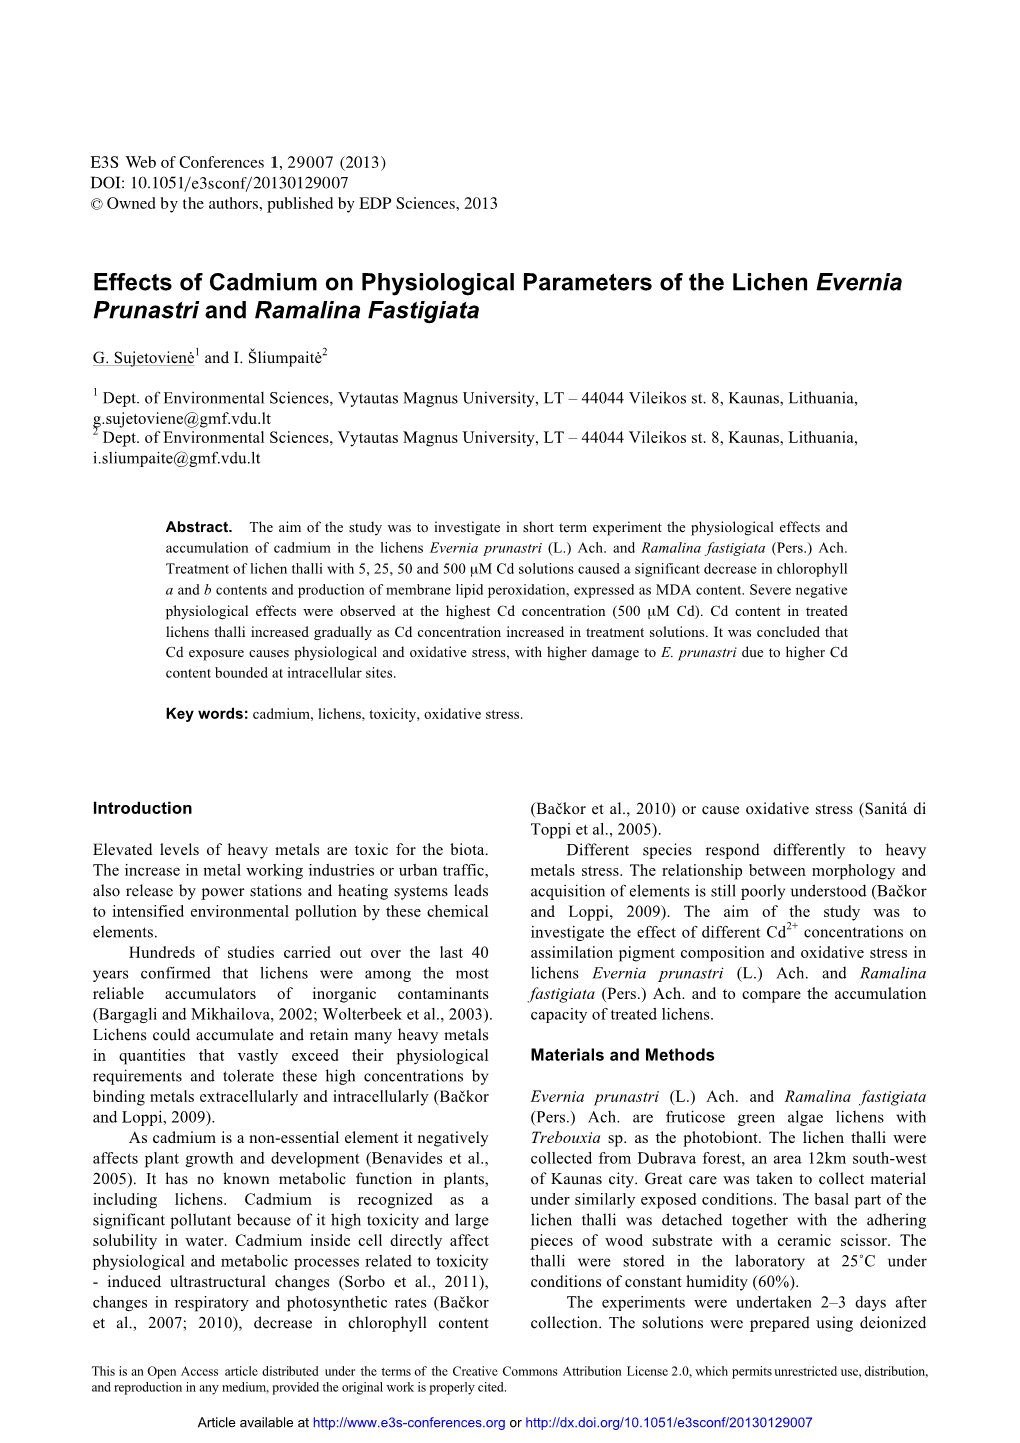 Effects of Cadmium on Physiological Parameters of the Lichen Evernia Prunastri and Ramalina Fastigiata